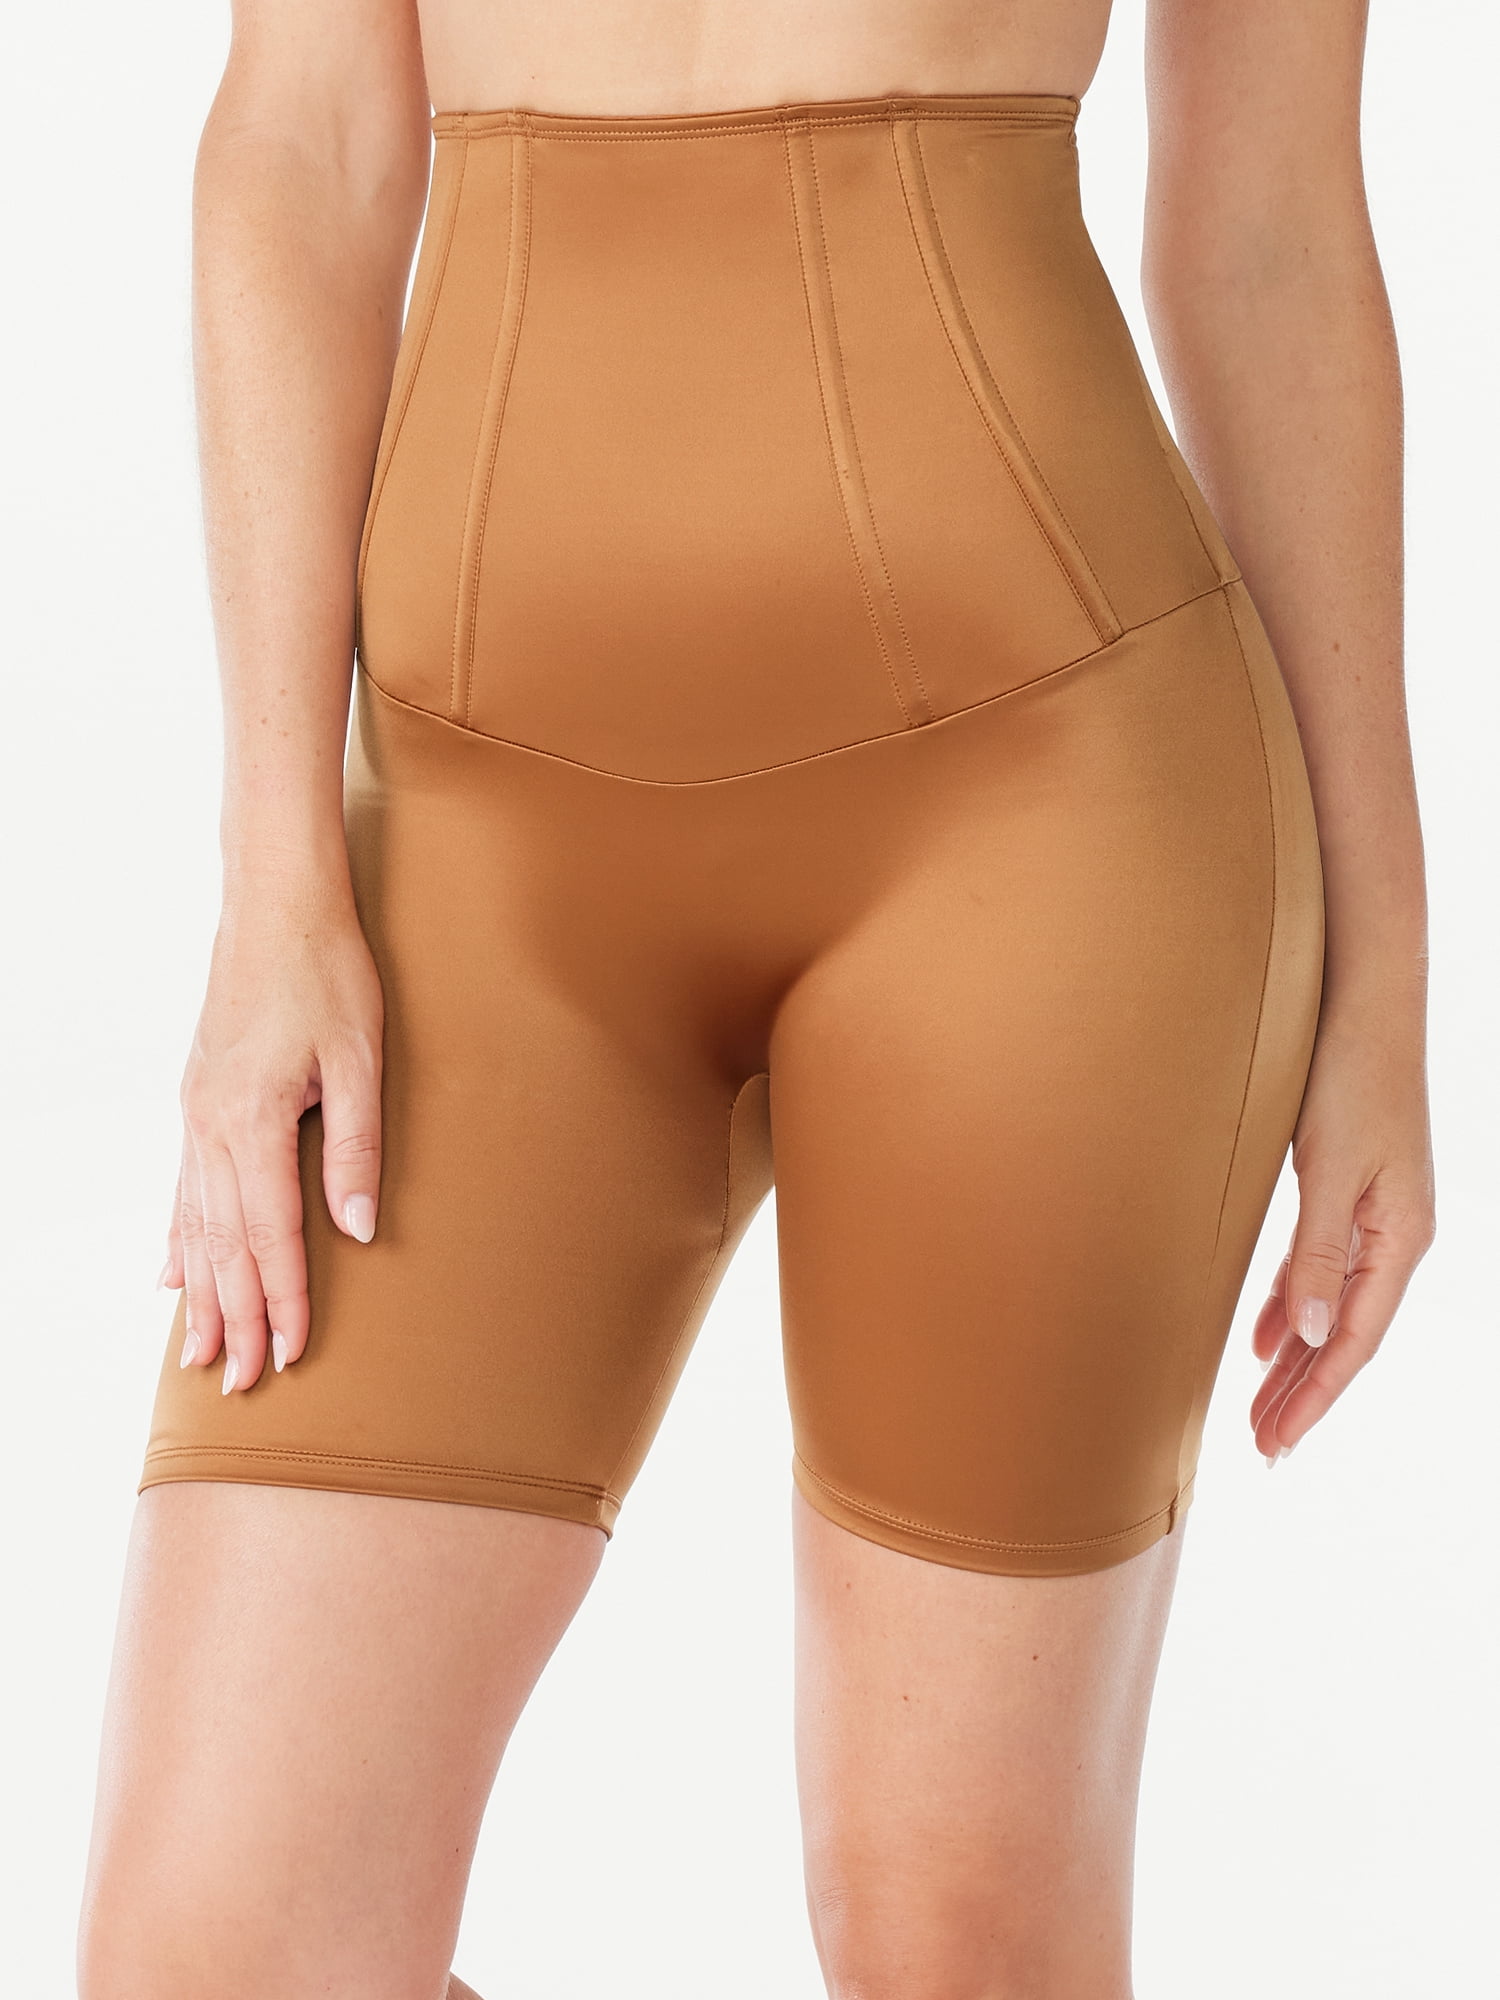 Women's Figure Shaping Bodice Pants With Leg Shapewear High Waist Body  Shaper Sexy Tops Beige at  Women's Clothing store